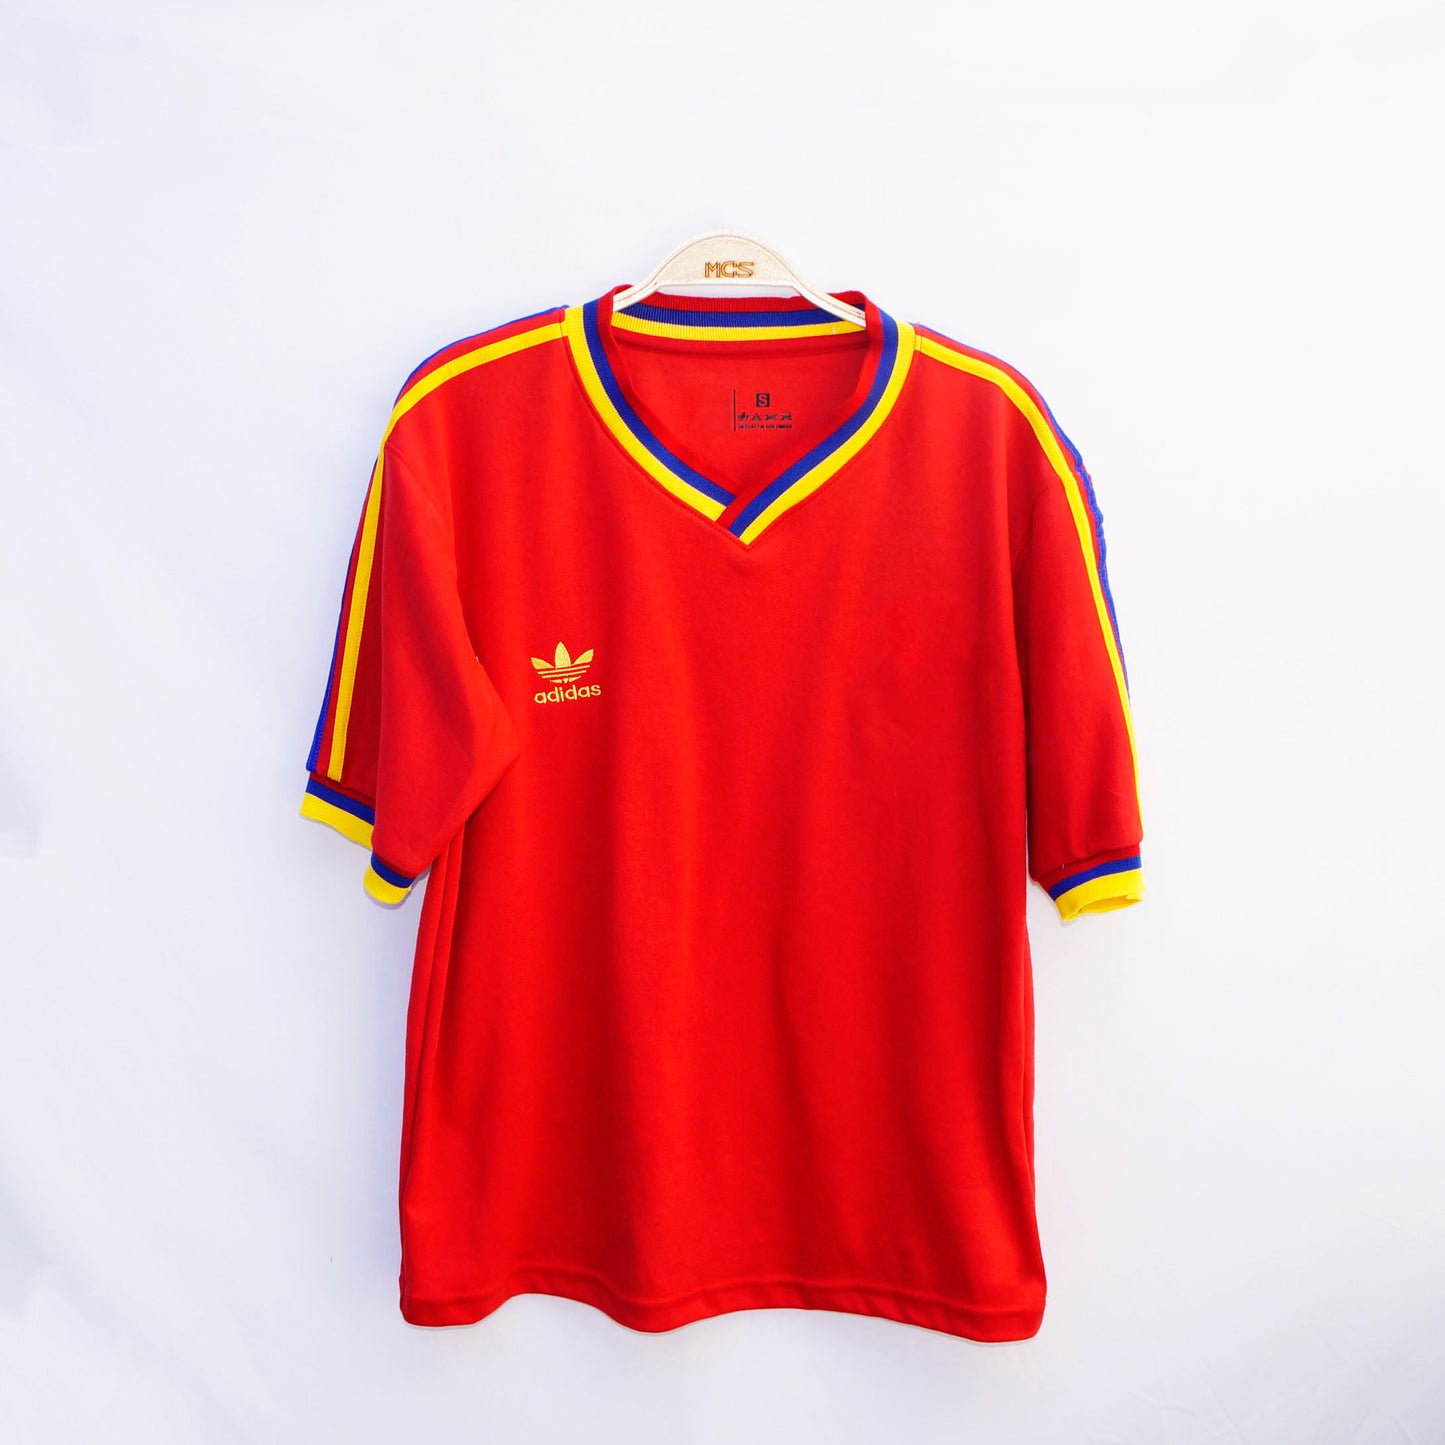 Colombia Red 1985 Retro Shirt